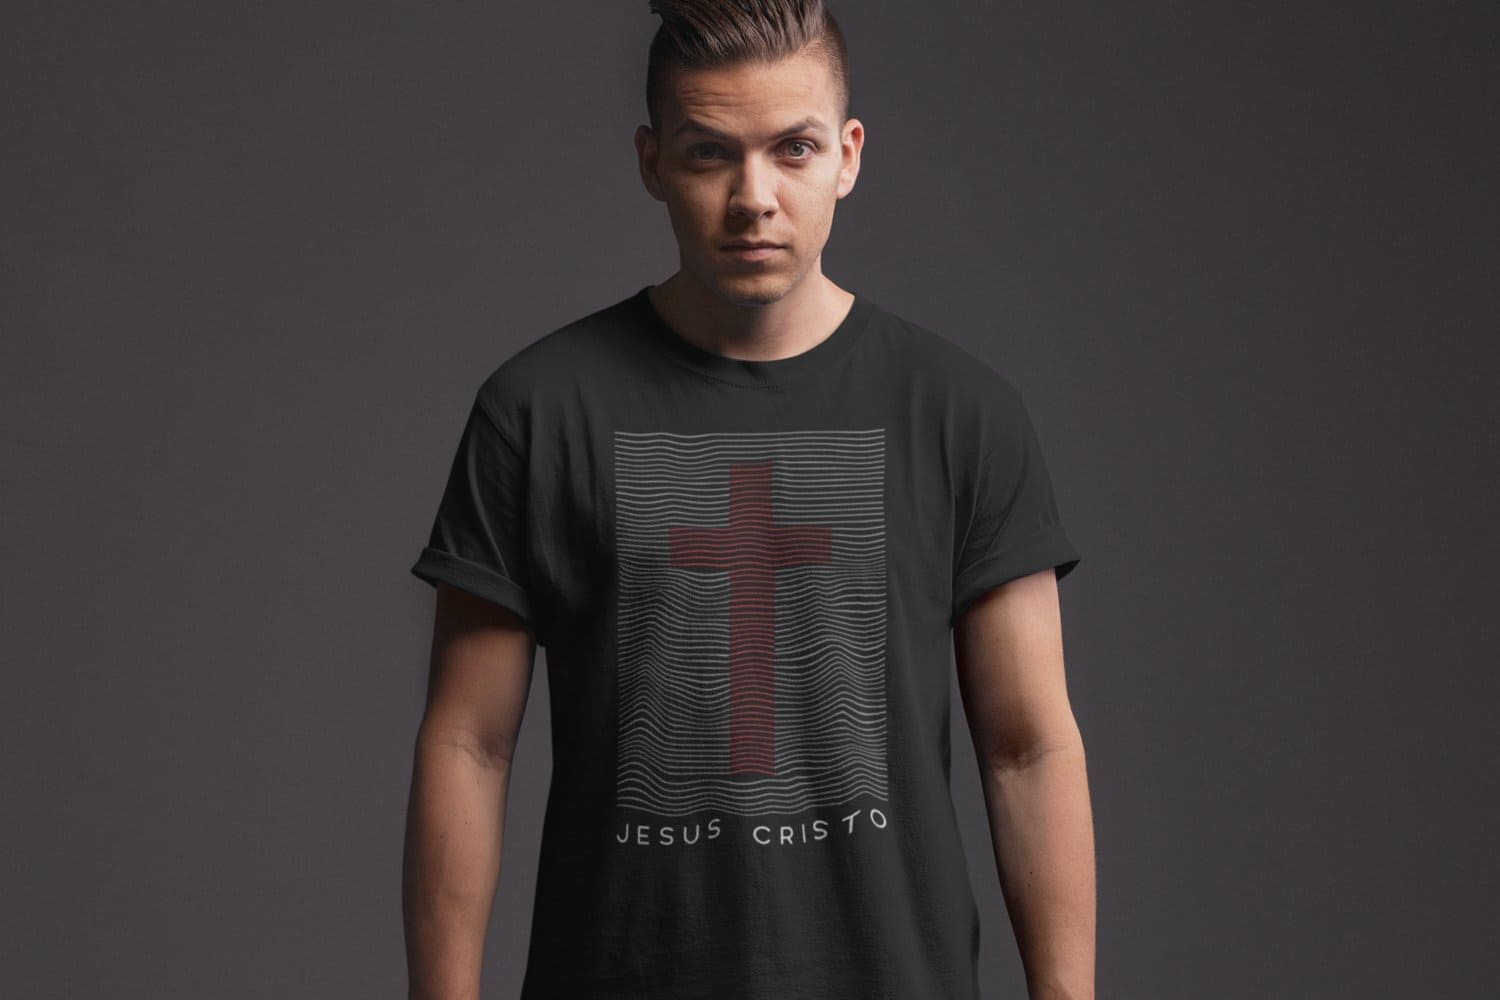 The inscription Jesus Christ under a red cross on a black t-shirt of a white guy.